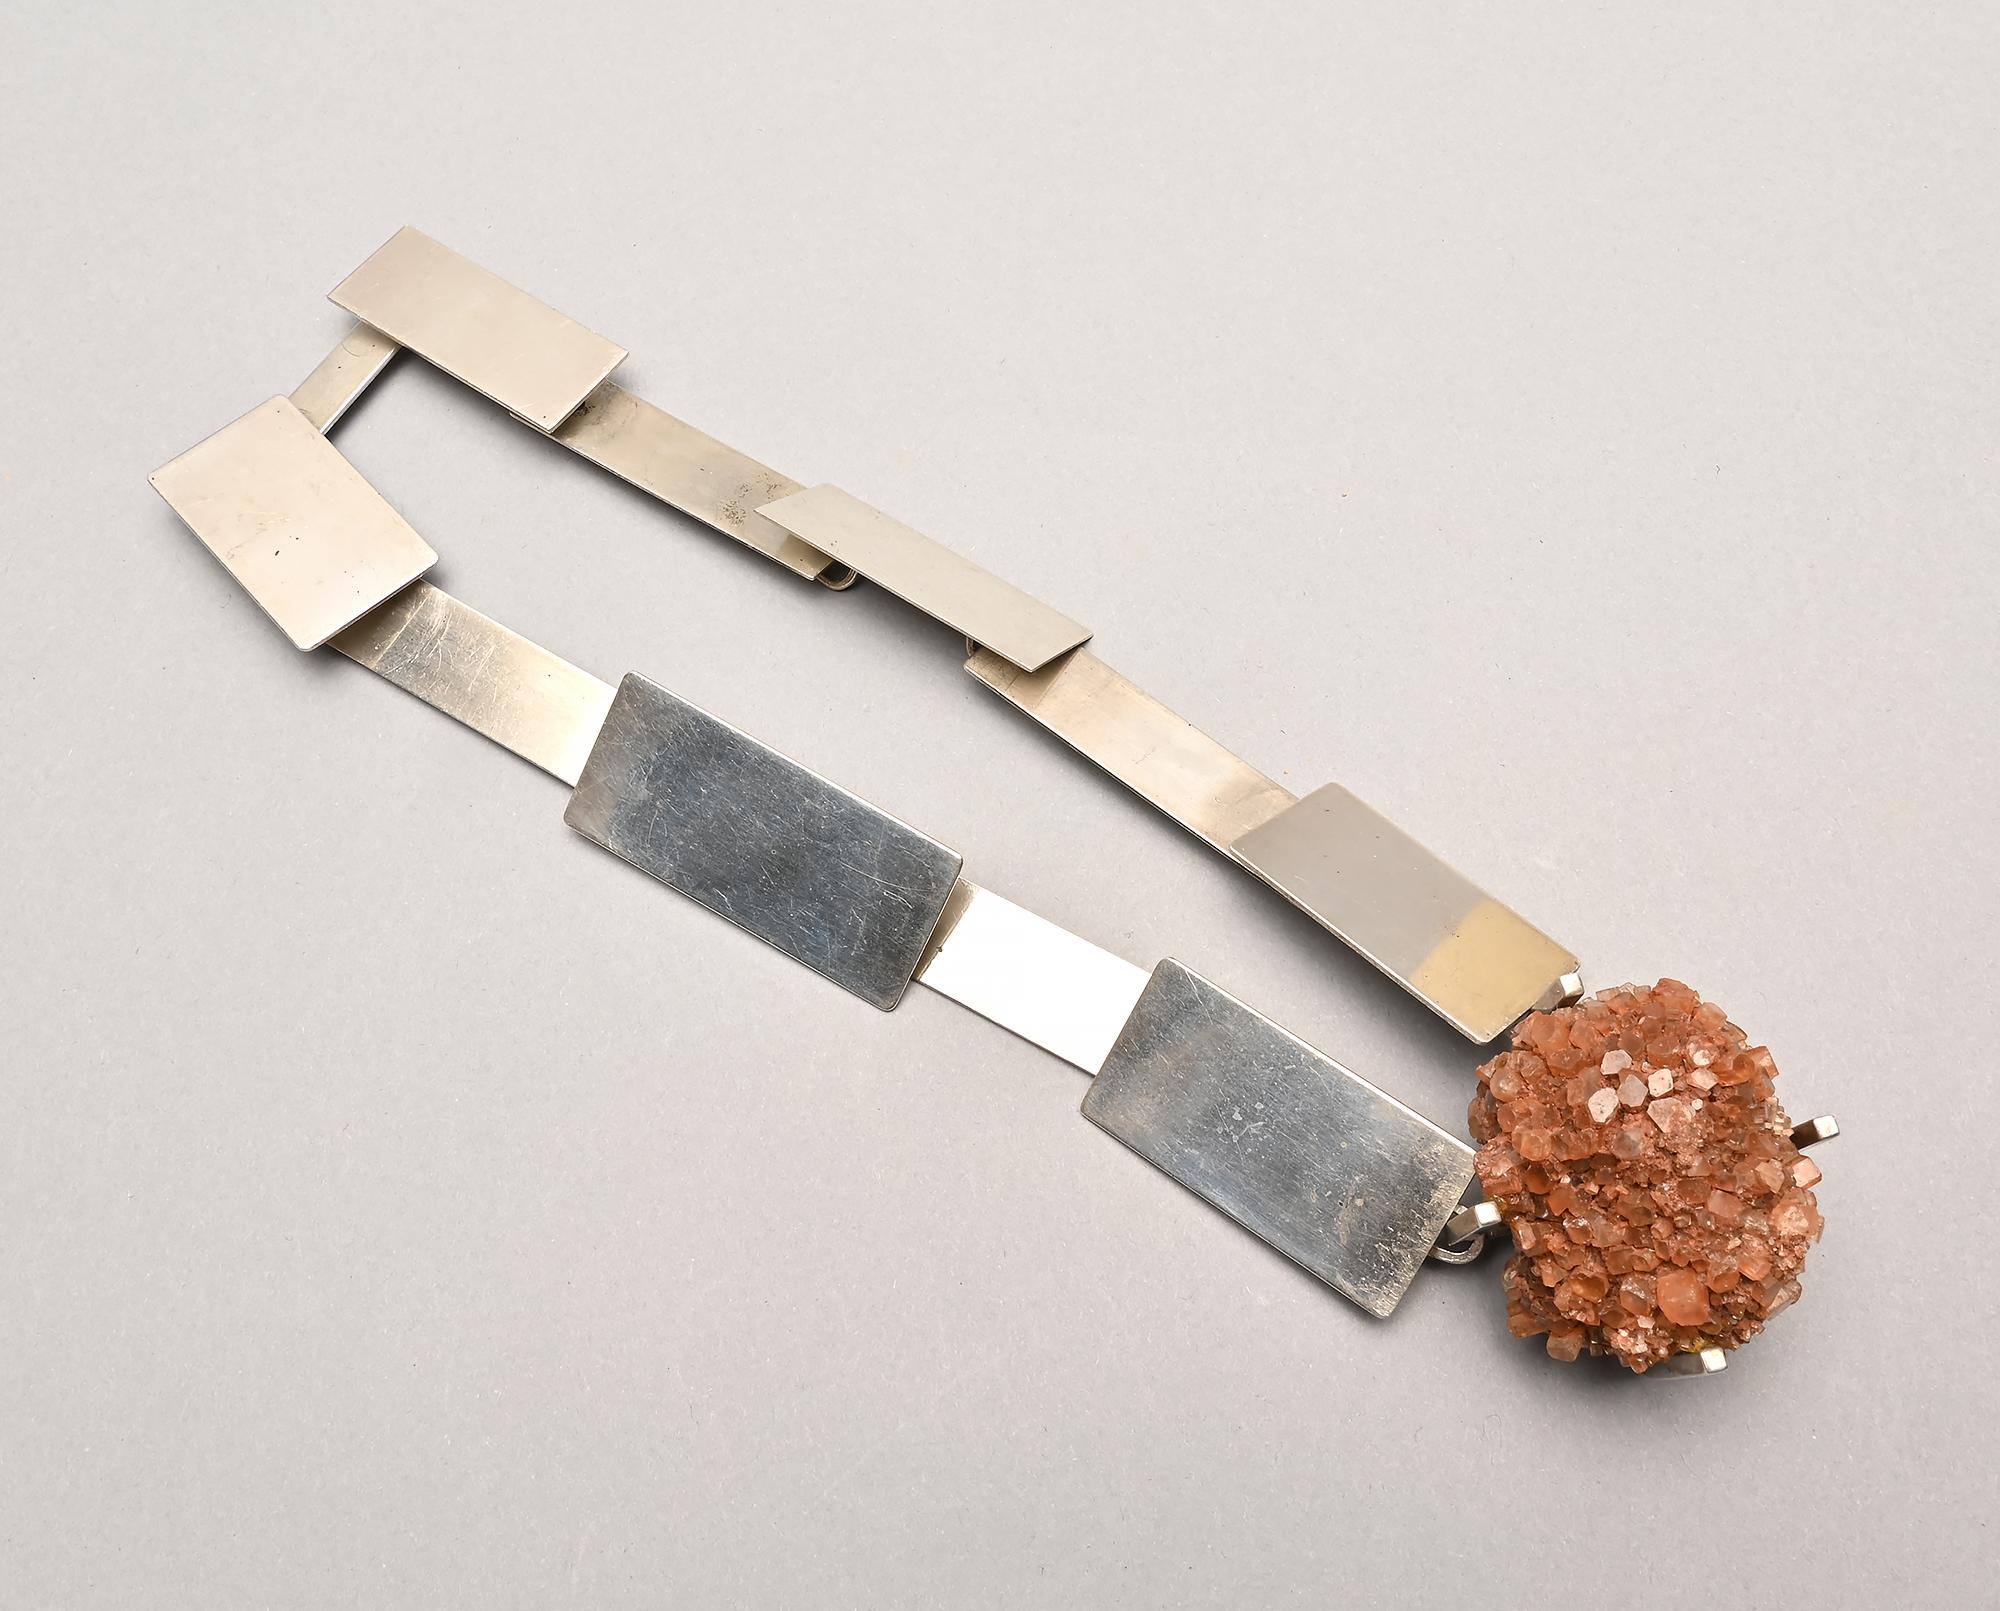 One of a kind sterling silver necklace by modernist designer, Betty Cooke. The necklace consists of eleven rectangular links of different sizes, the largest being 1